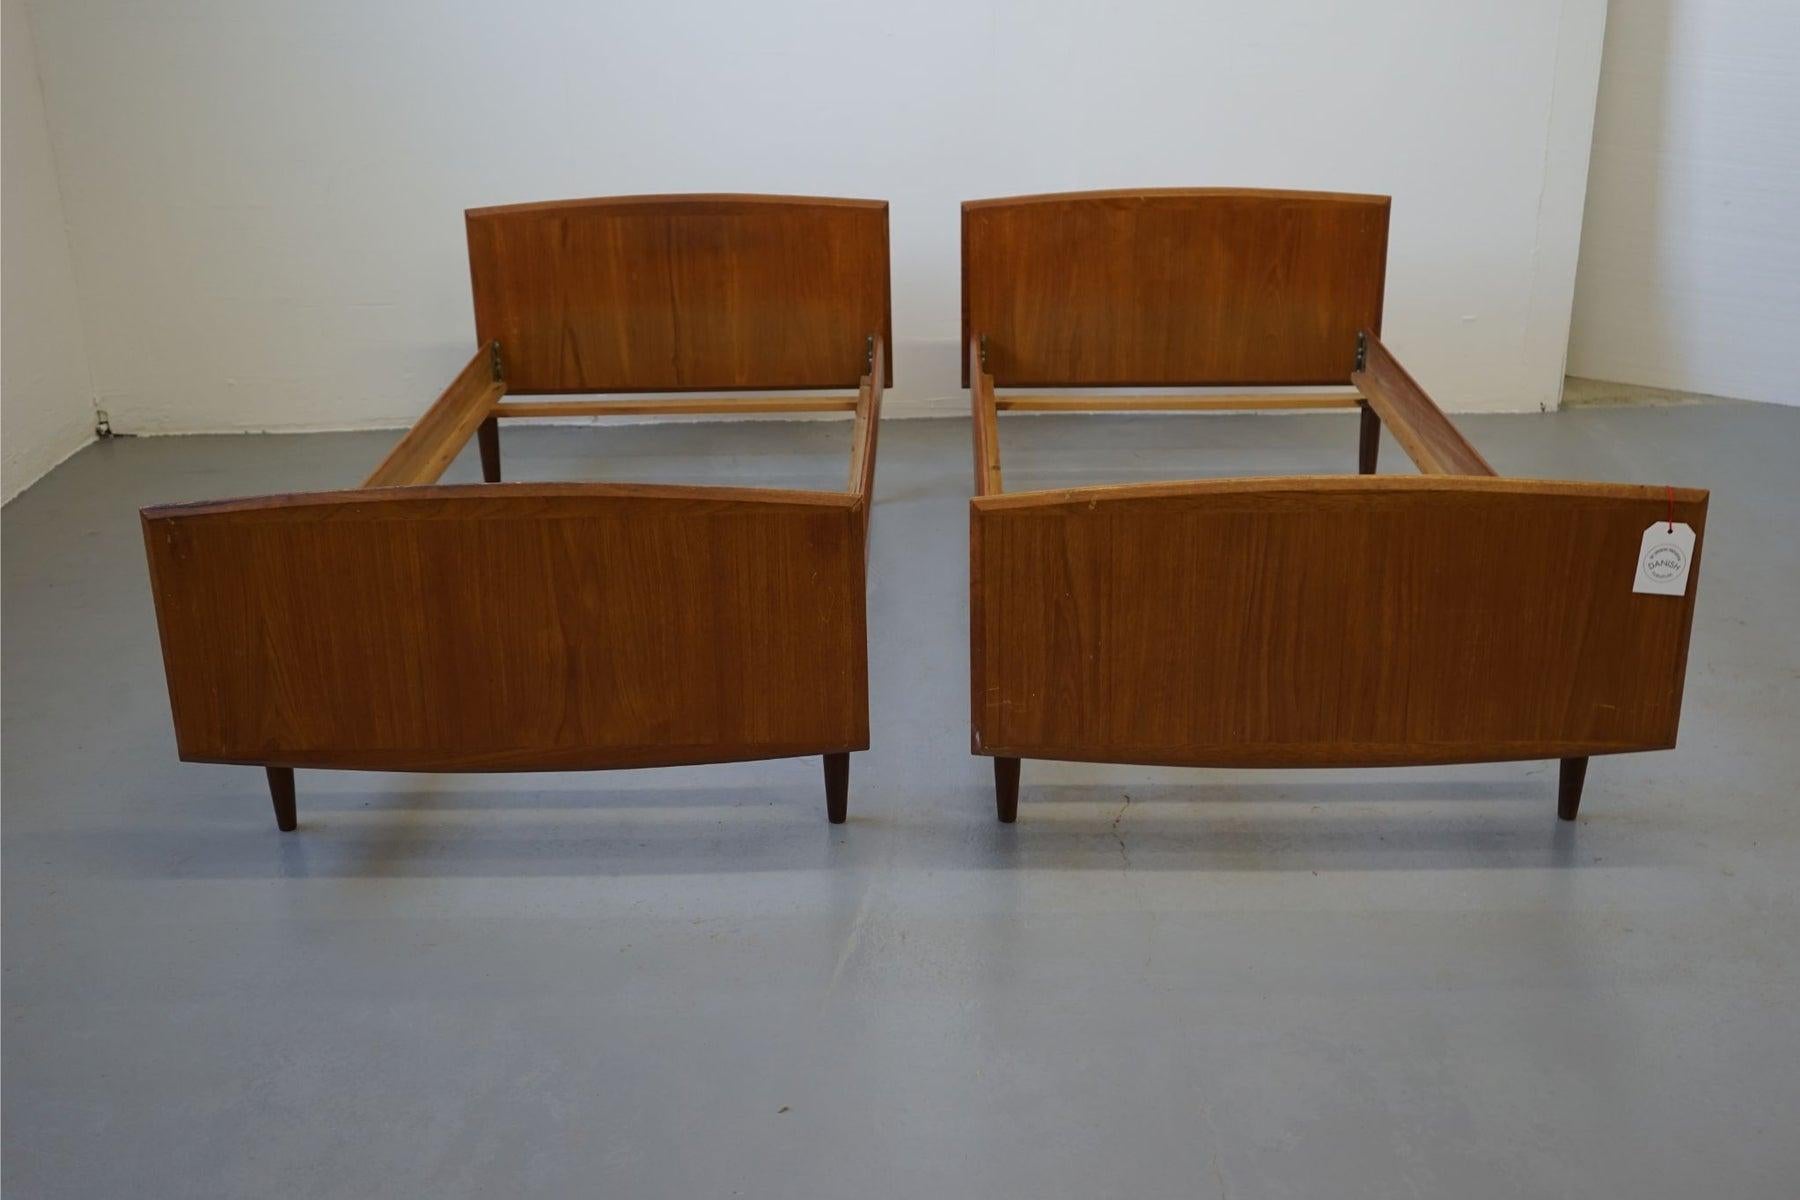 Teak pair of single twin beds, circa 1960's. Low profile design means all you need is a mattress, no box-spring or foundation required!

***Note European mattress size required 33.5